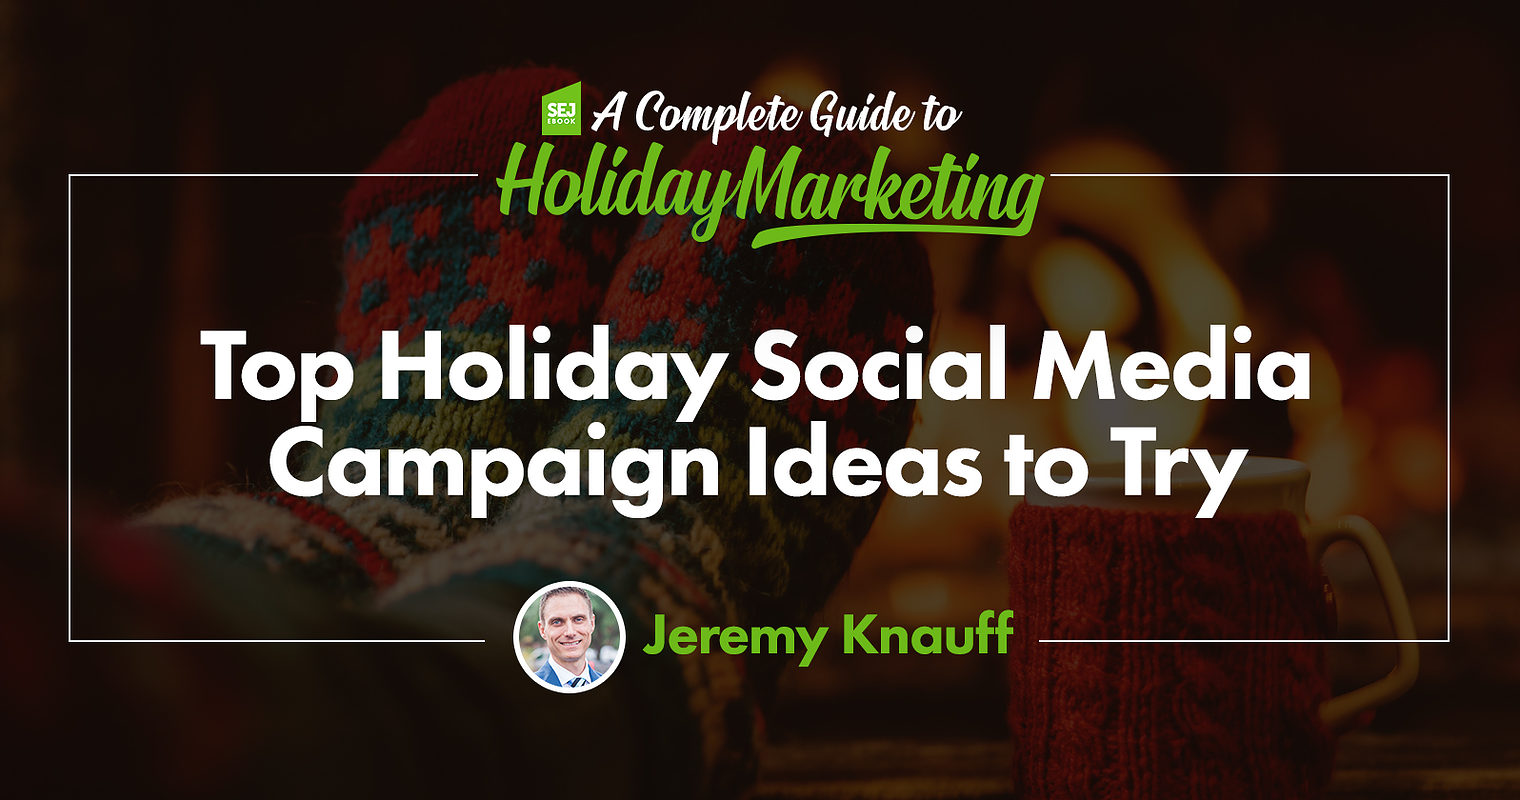 Top Holiday Social Media Campaign Ideas to Try